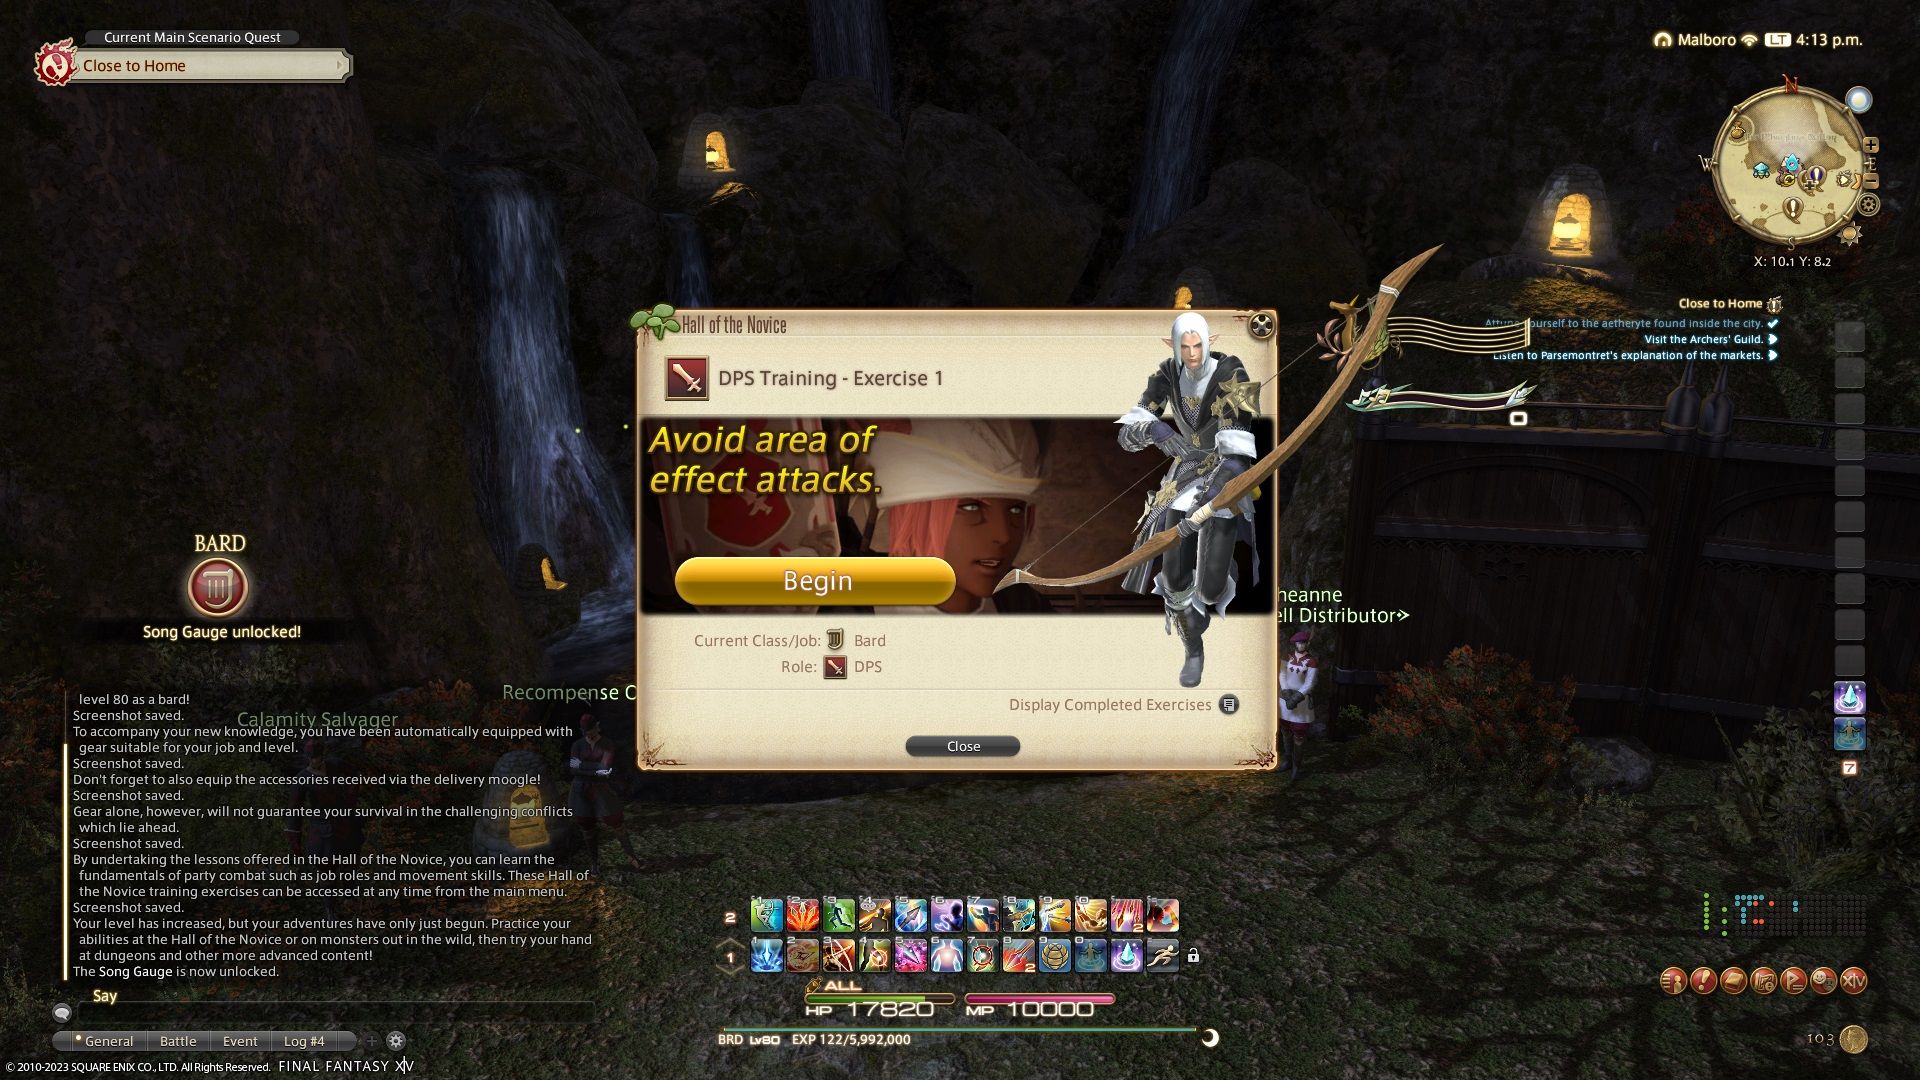 Final Fantasy 14 - The Hall of the Novice menu appearing on screen for the first time.